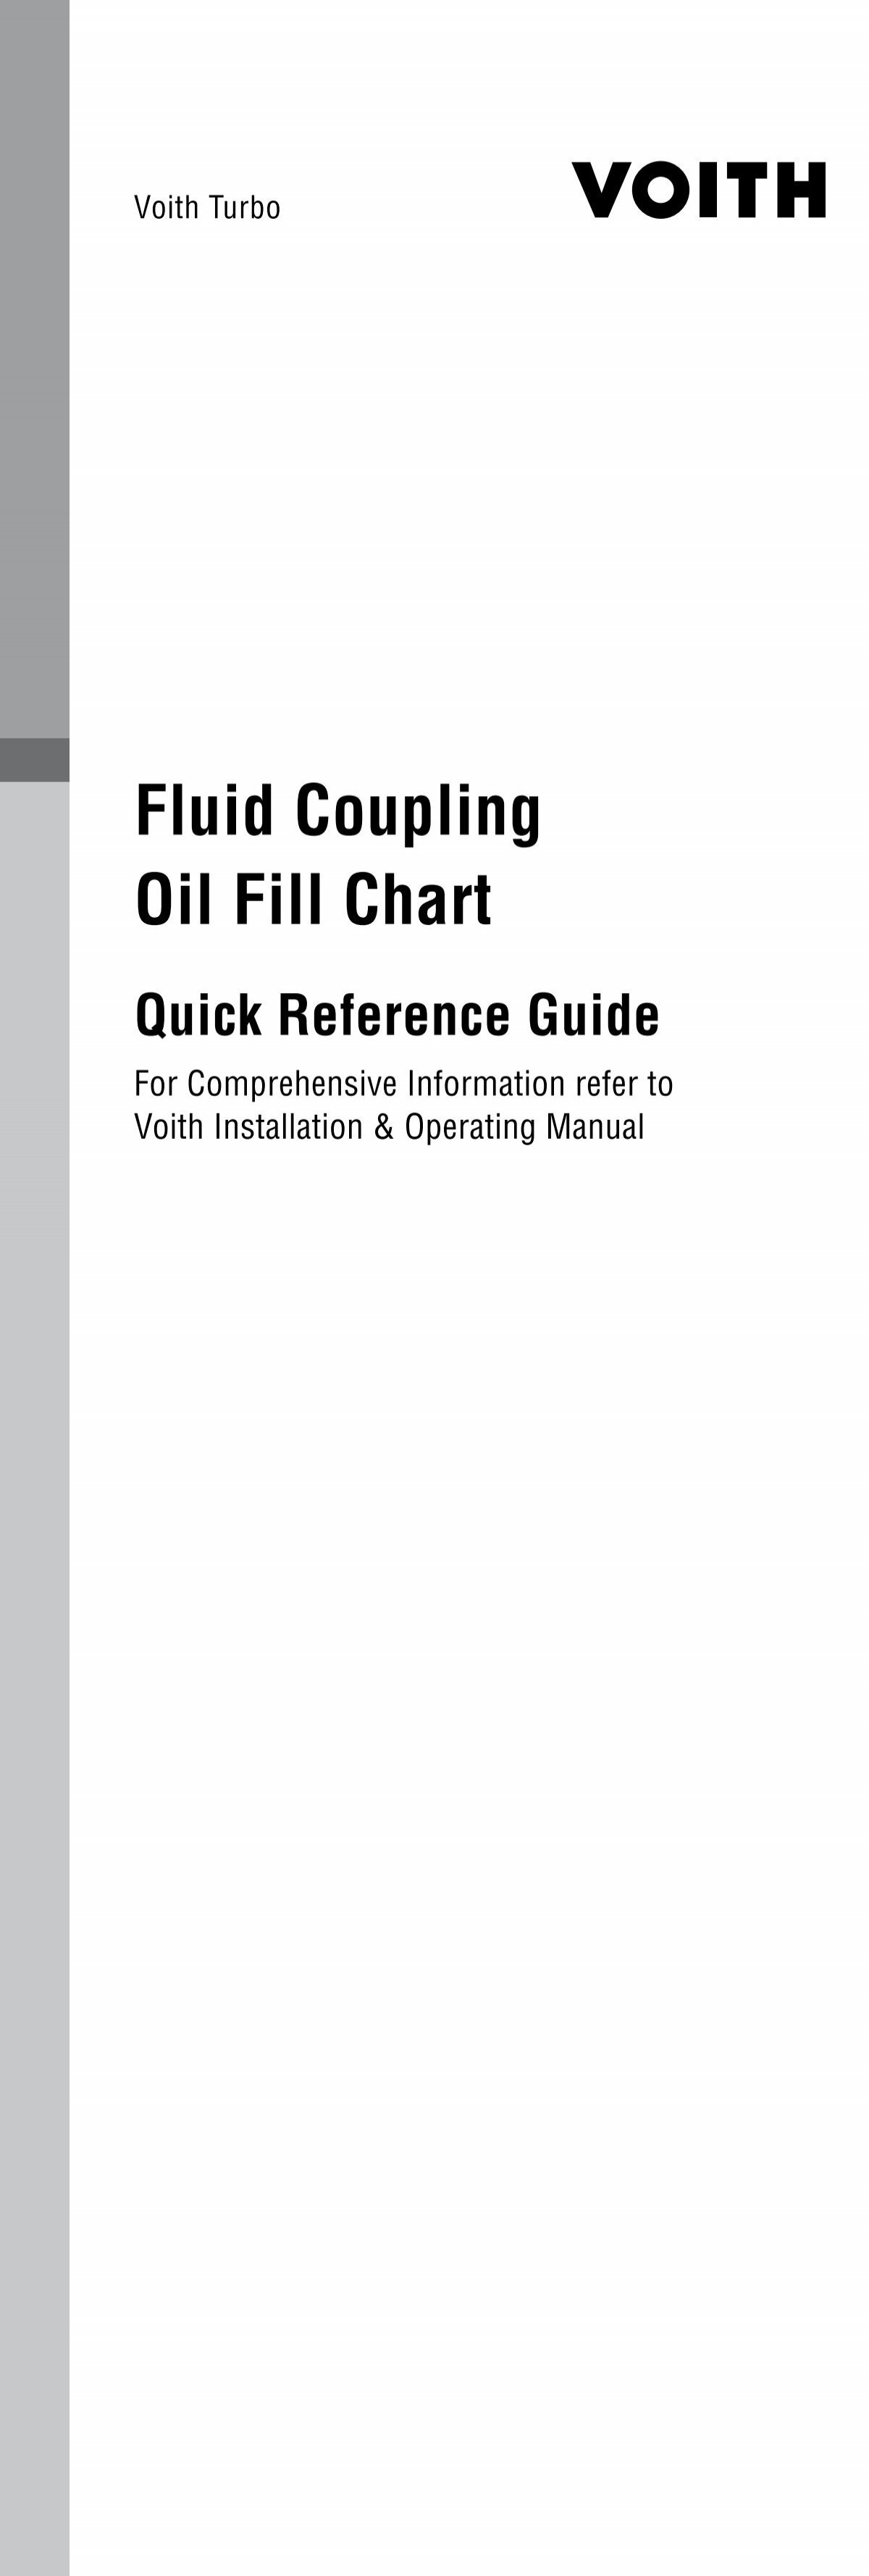 Voith Fluid Coupling Oil Fill Chart